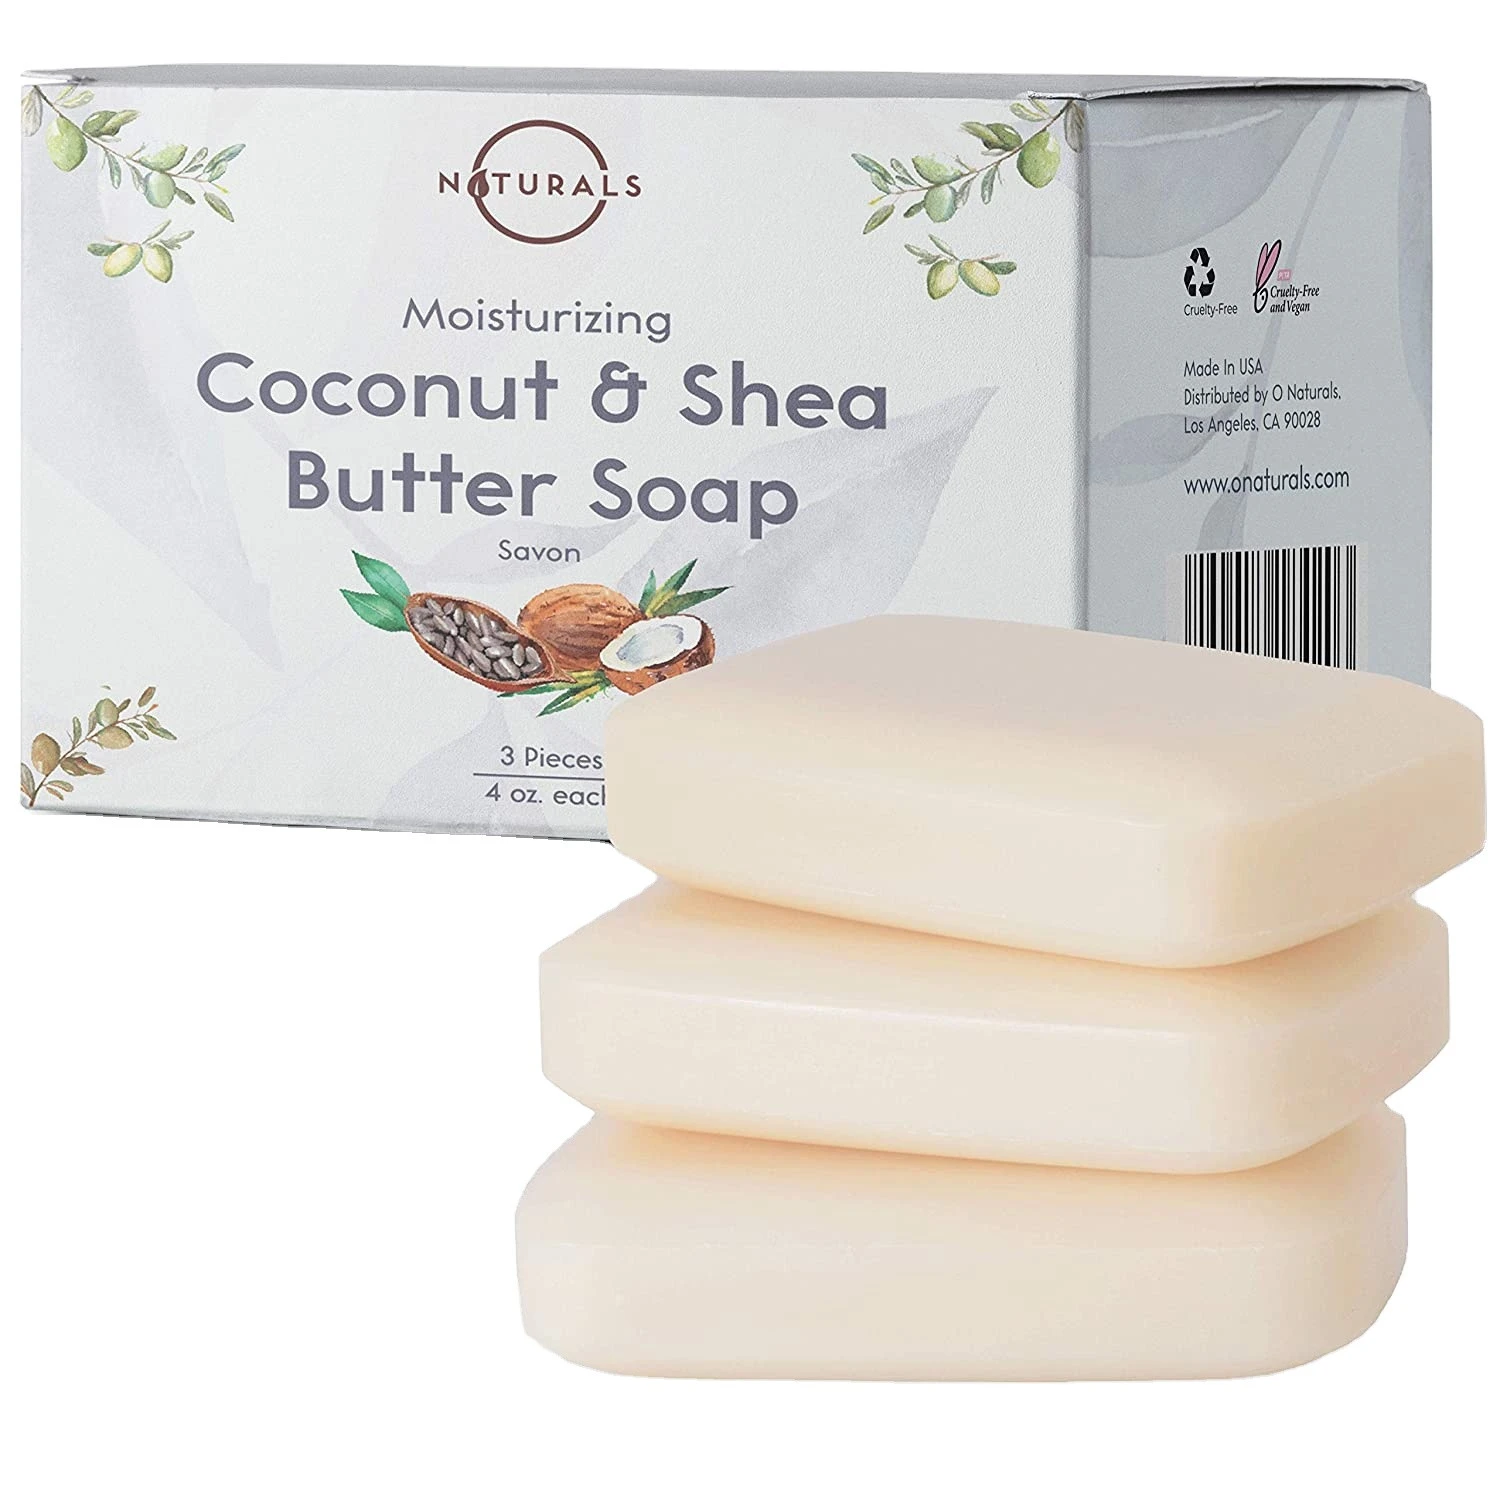 High quality Vegetable oil Soap , suitable for faces, hands and bodies